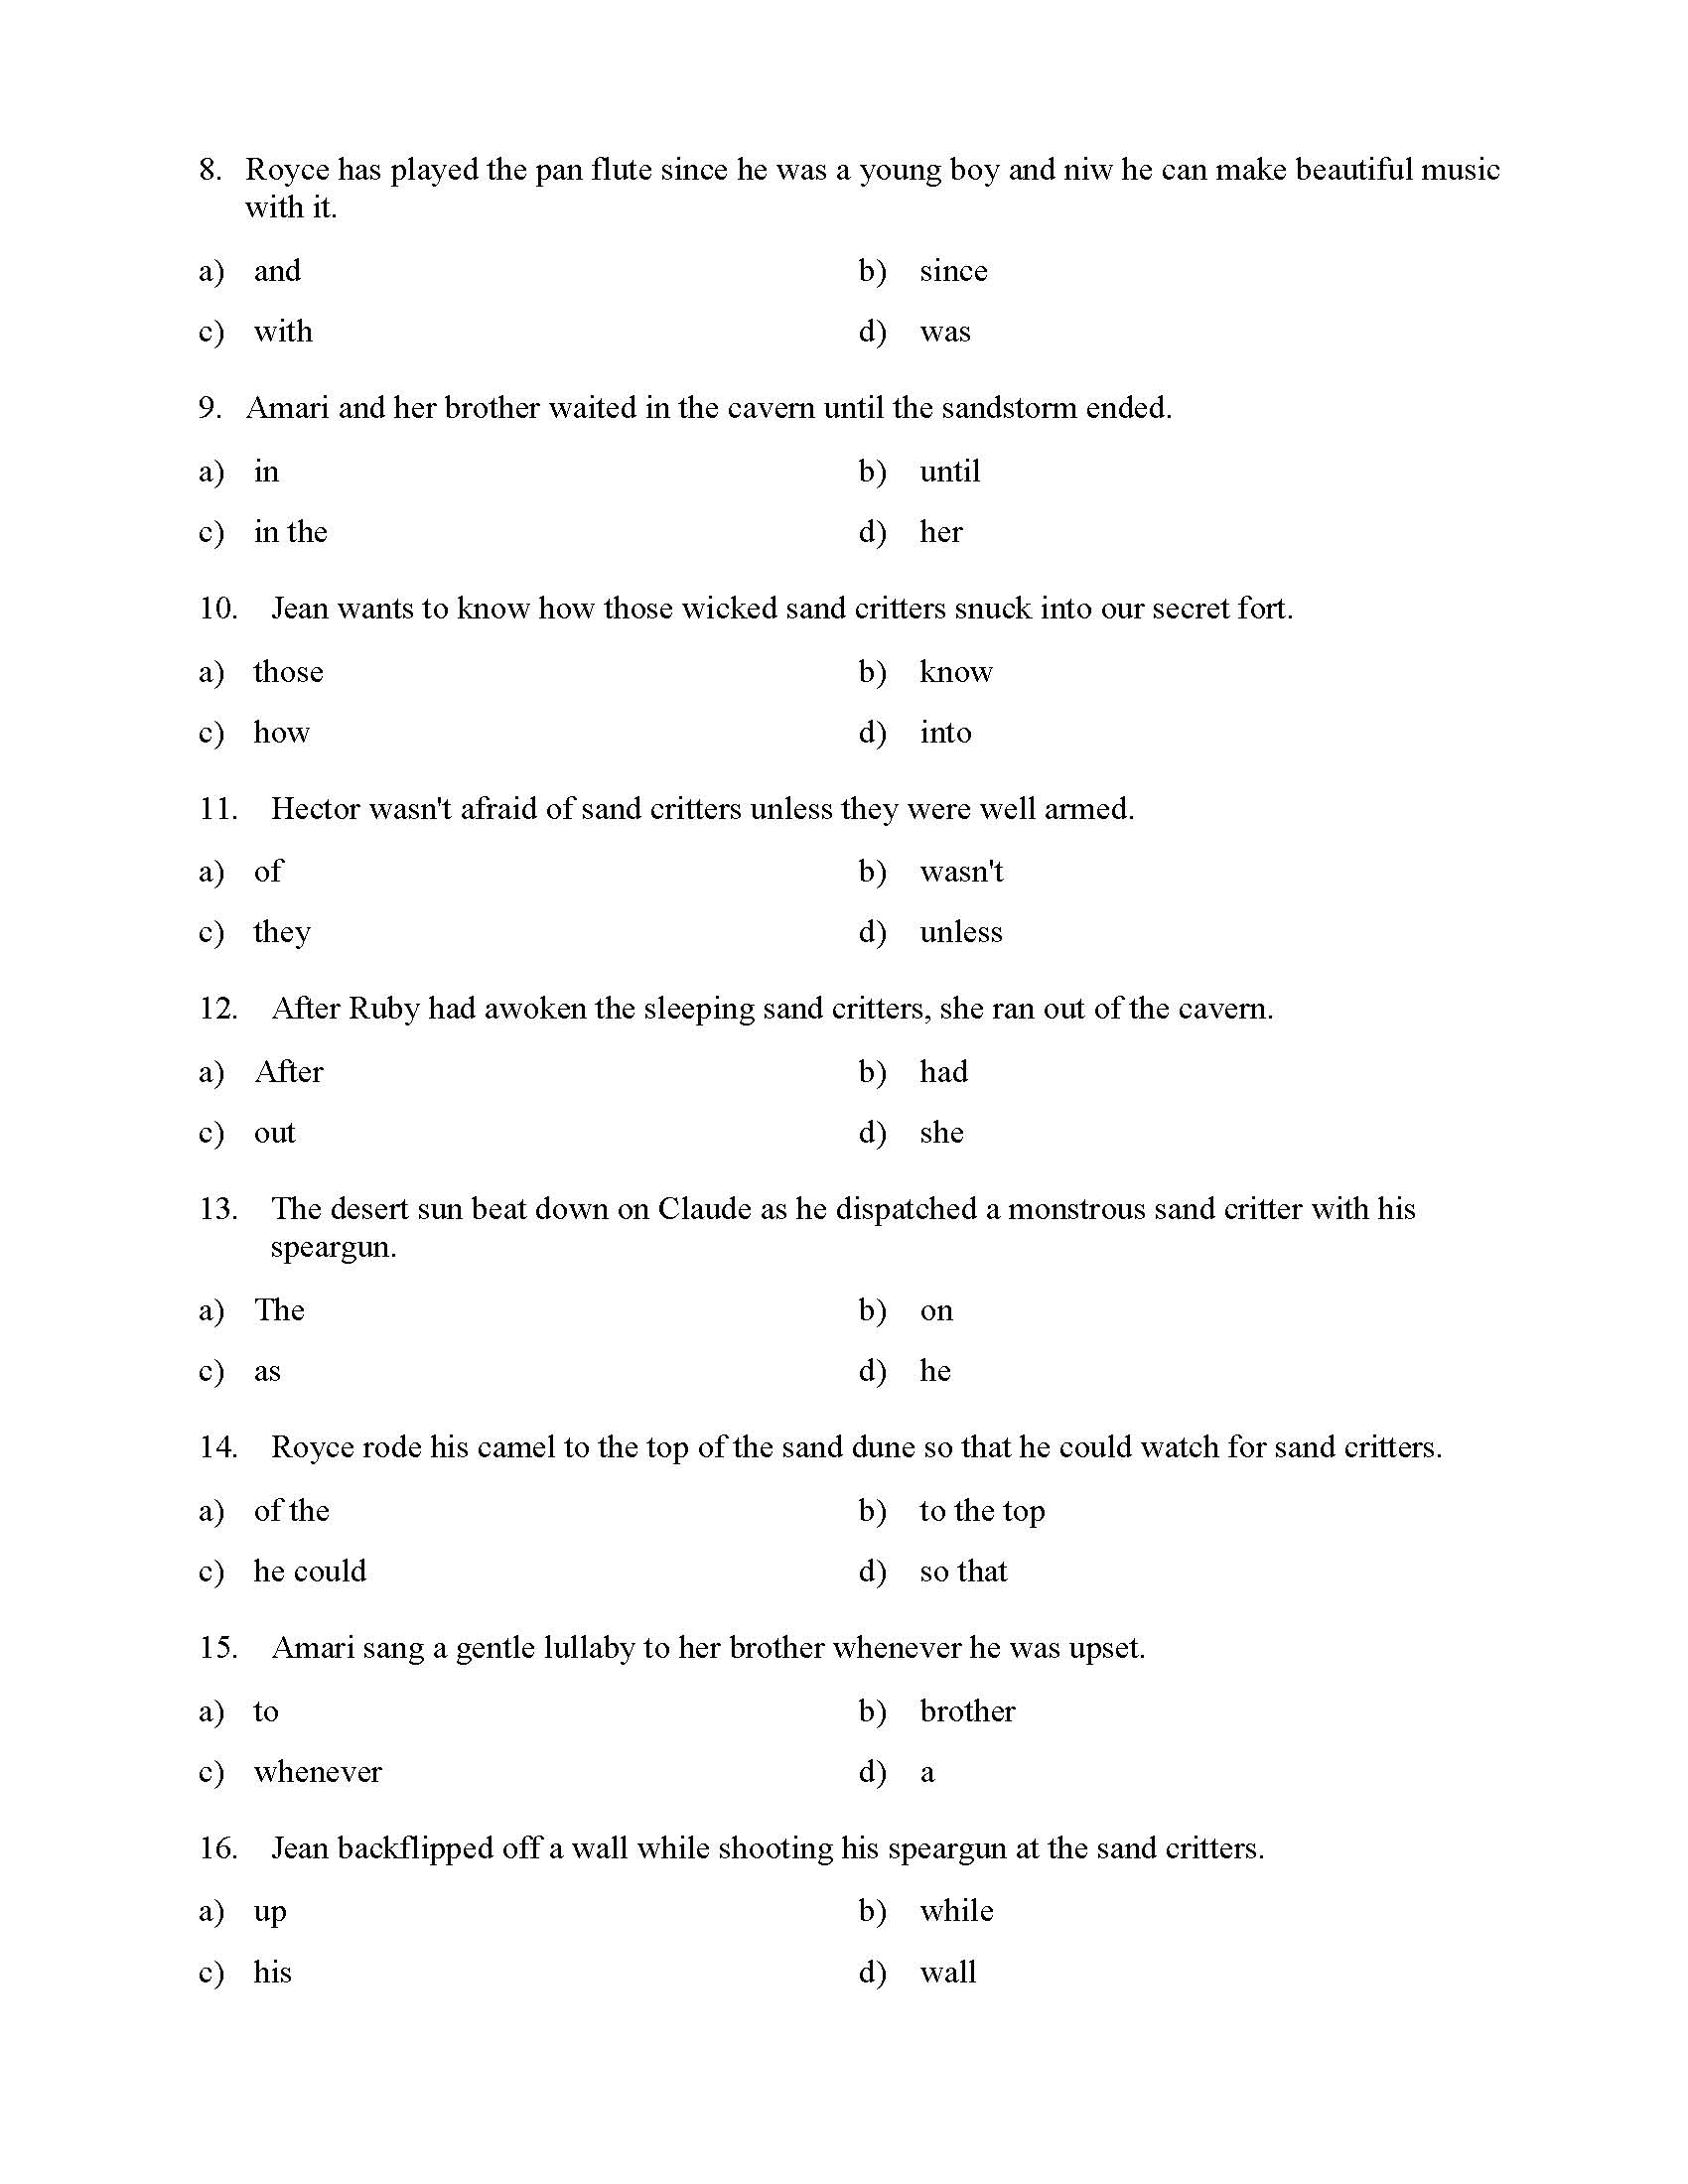 conjunction-worksheets-grade-3-parts-of-speech-worksheets-k5-learning-dheeraj-is-clever-but